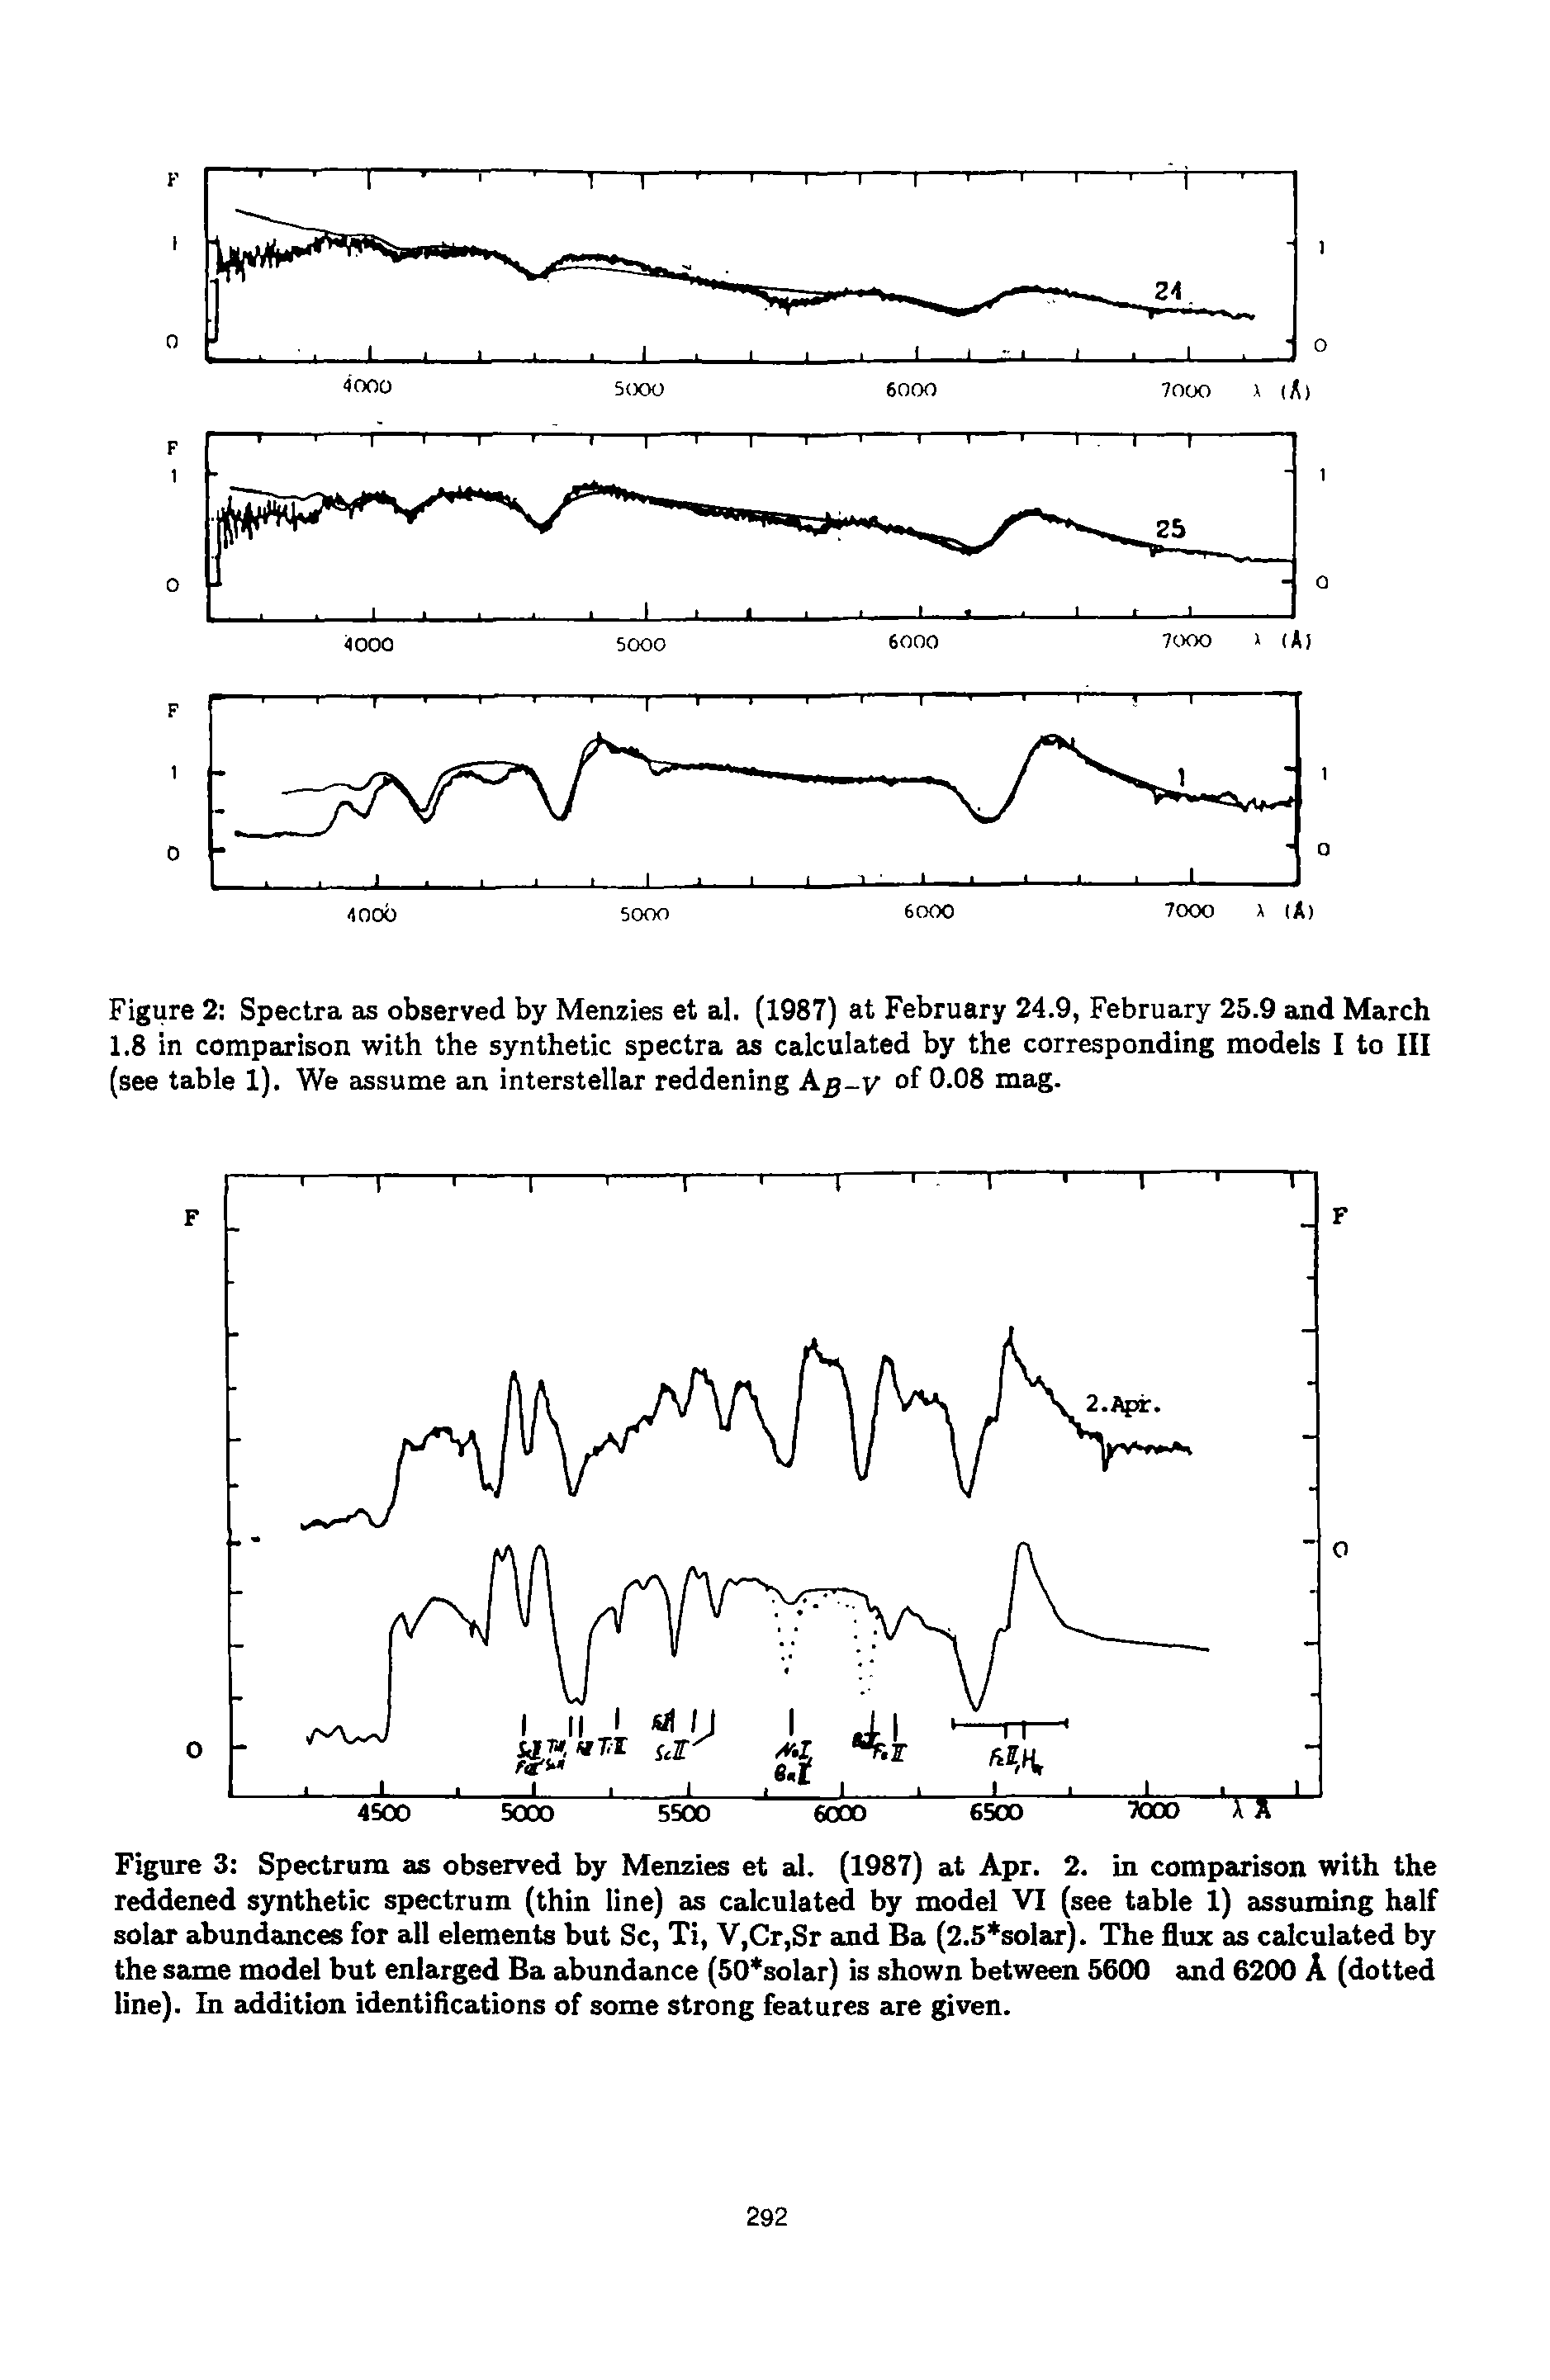 Figure 3 Spectrum as observed by Menzies et al. (1987) at Apr. 2. in comparison with the reddened synthetic spectrum (thin line) as calculated by model VI (see table 1) assuming half solar abundances for all elements but Sc, Ti, V,Cr,Sr and Ba (2.5 solar). The flux as calculated by the same model but enlarged Ba abundance (50 solar) is shown between 5600 and 6200 A (dotted line). In addition identifications of some strong features are given.